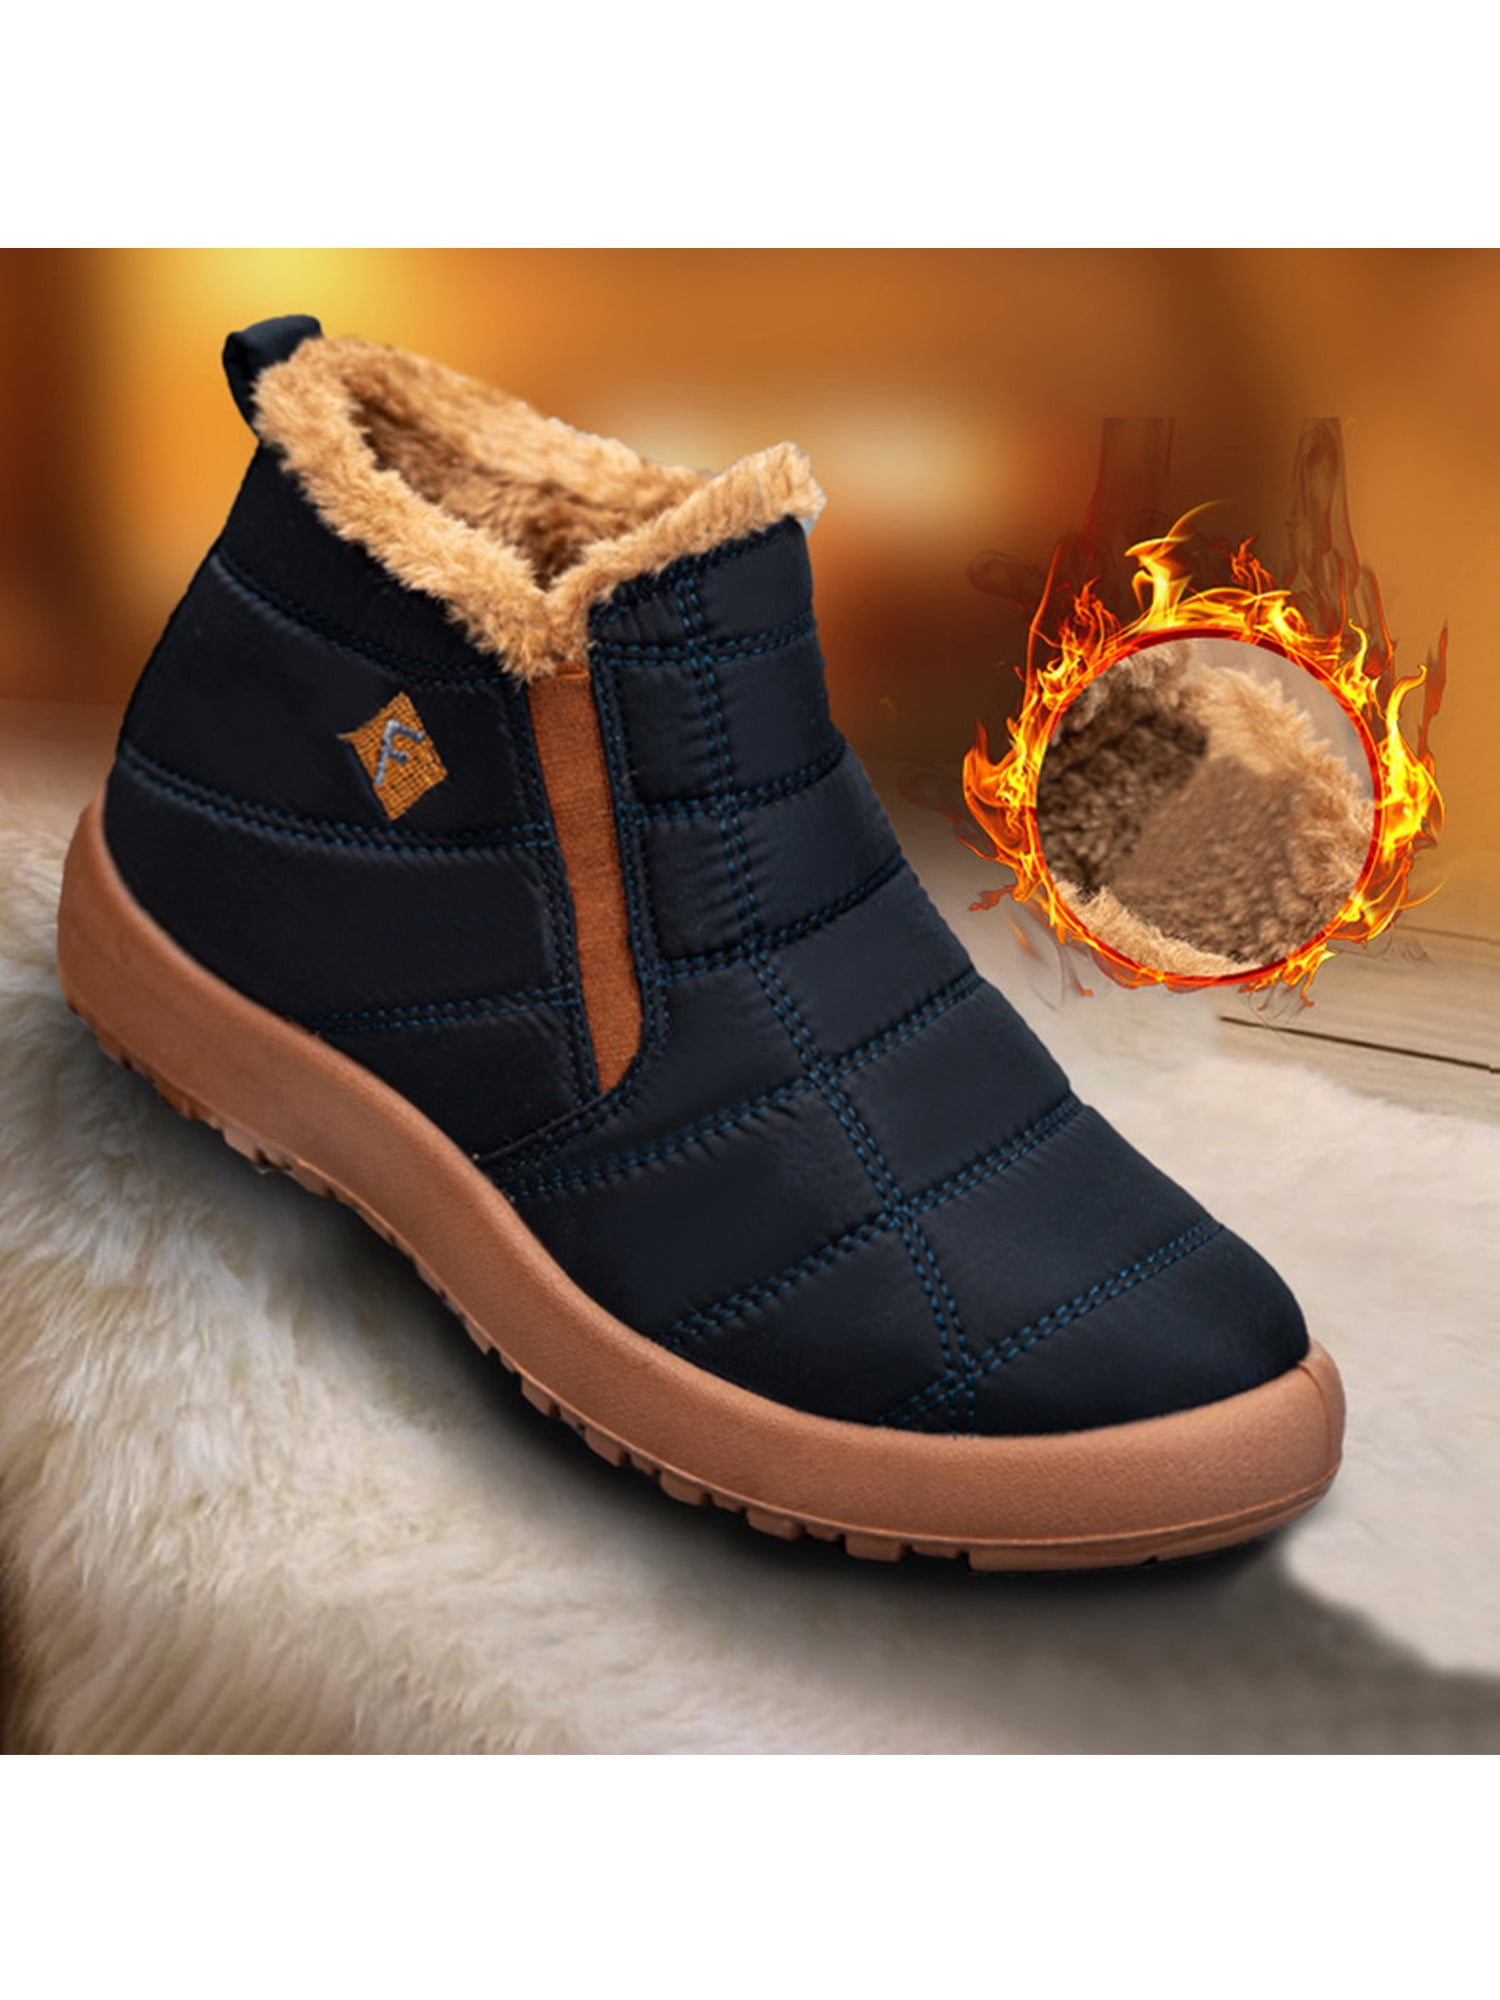 Mens Waterproof Winter Snow Ankle Boots Fur Lined Slip on Outdoor Casual Shoes